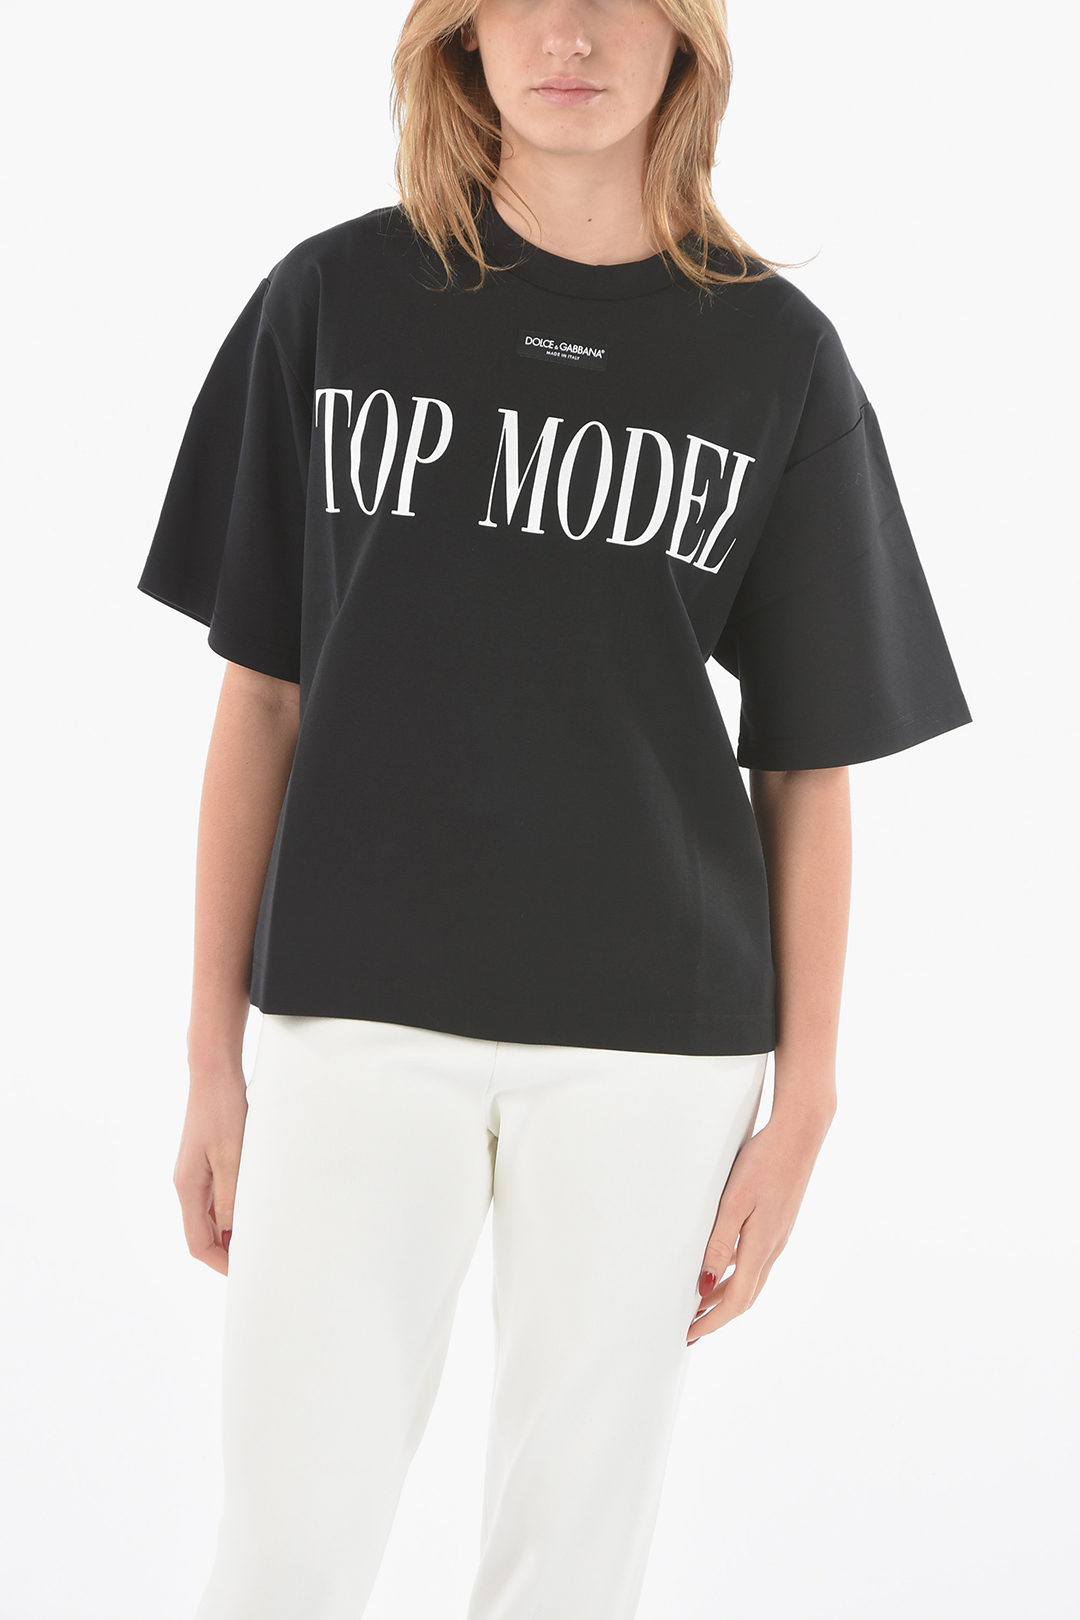 Dolce & Gabbana Crewneck women Glamood - with Outlet TOP T-shirt Print MODEL Lettering